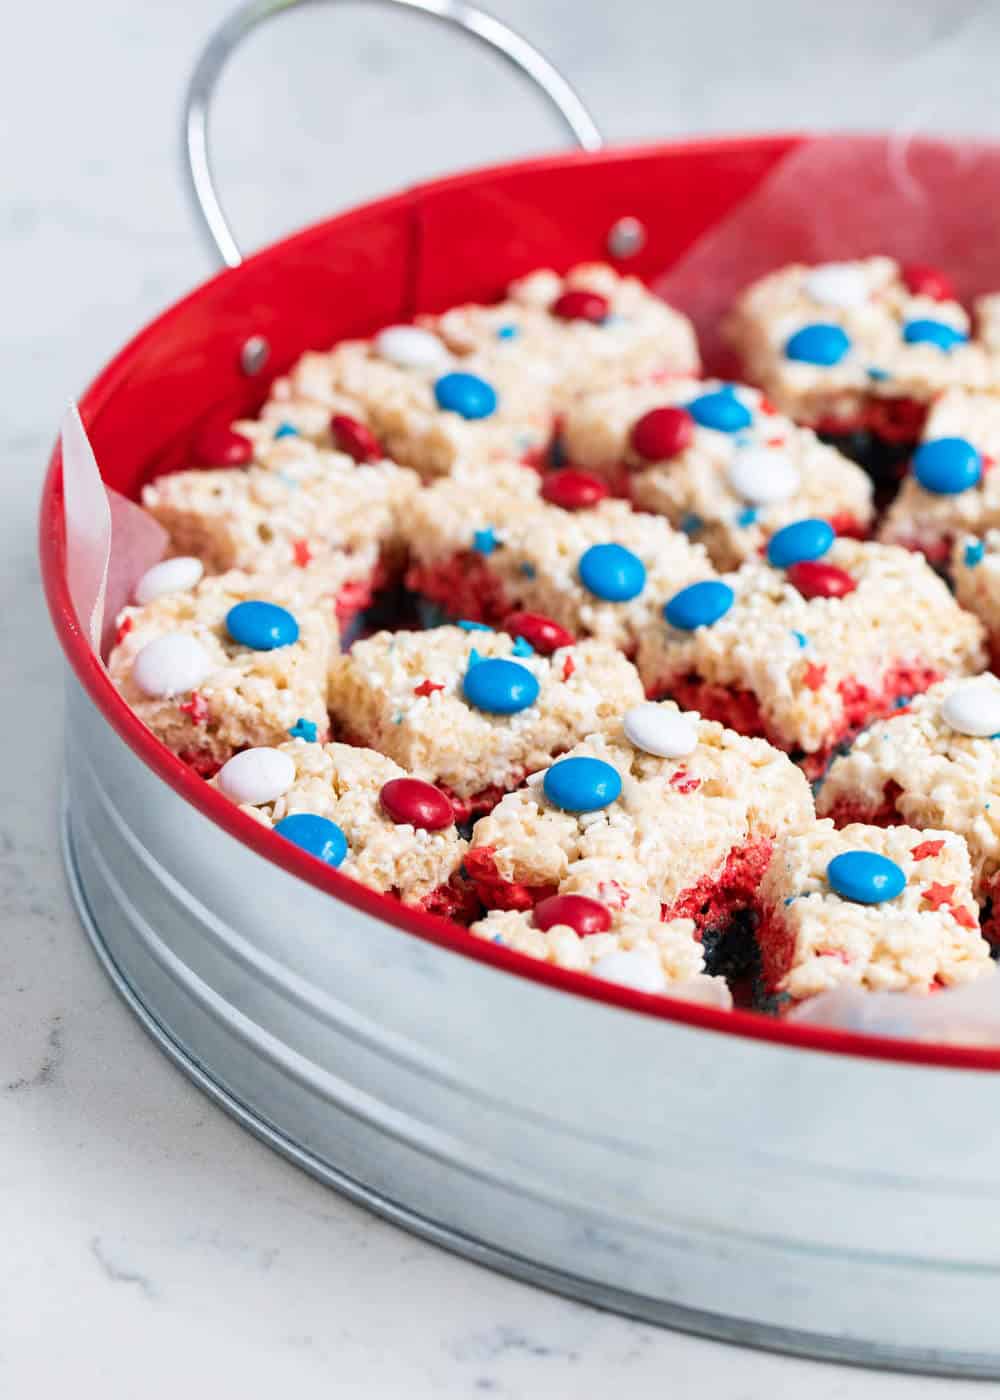 Red white and blue rice krispie treats on a silver and red tray.